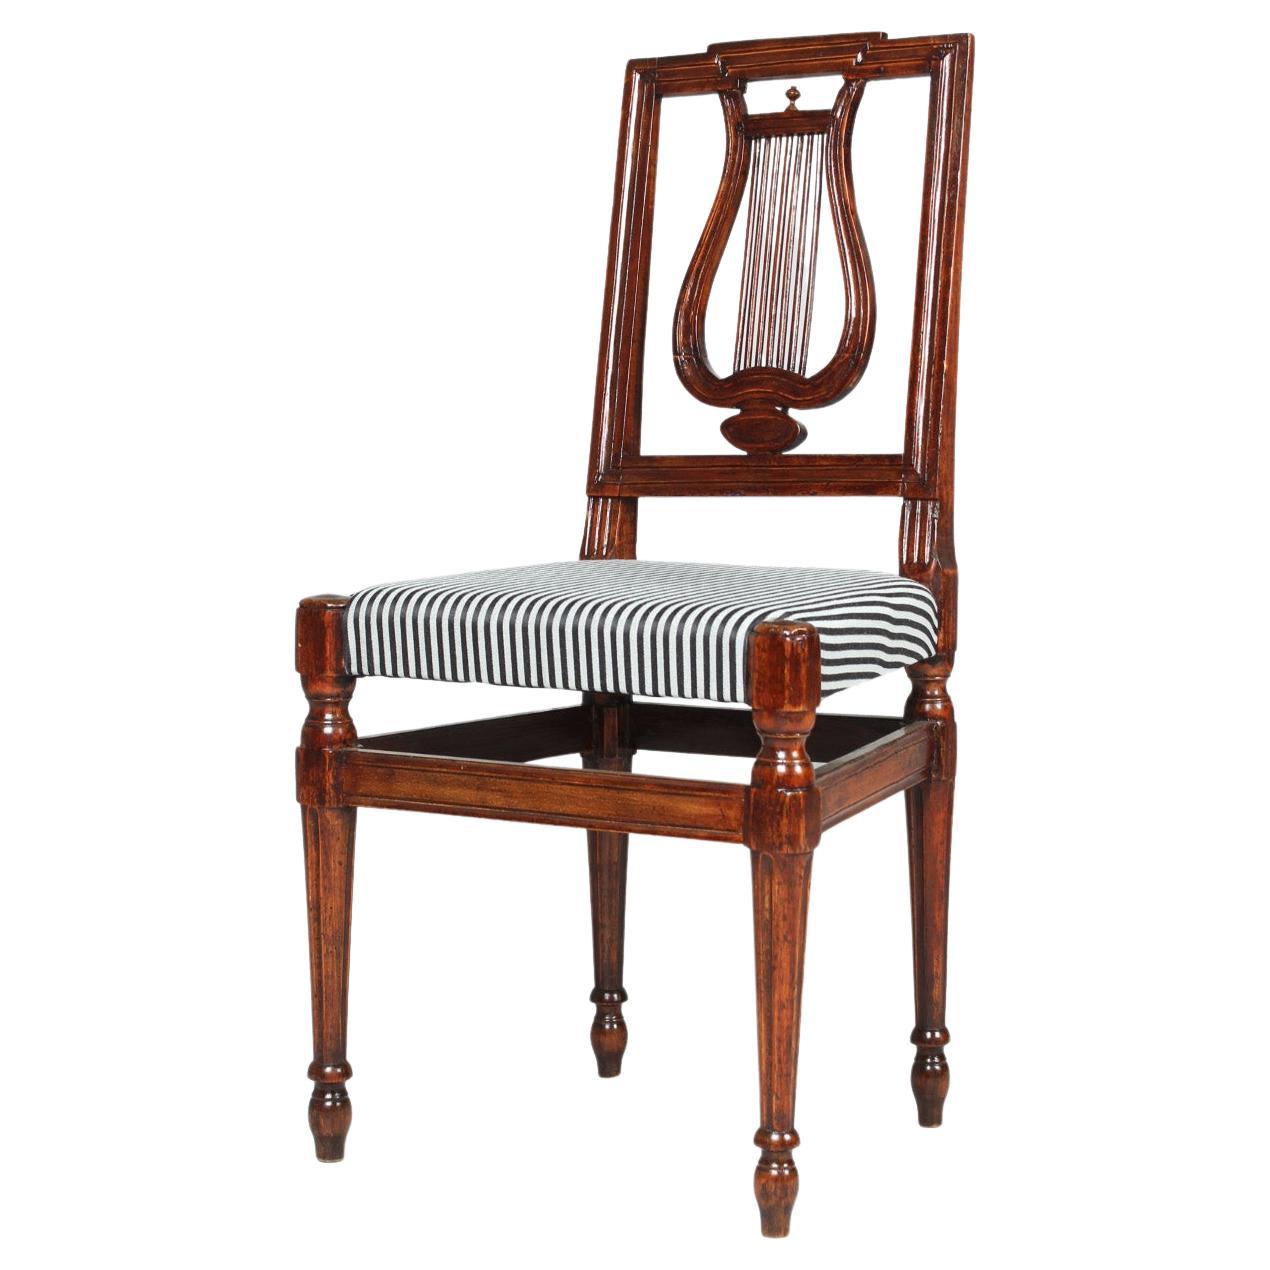 Early 19th Century Lyre-Chair